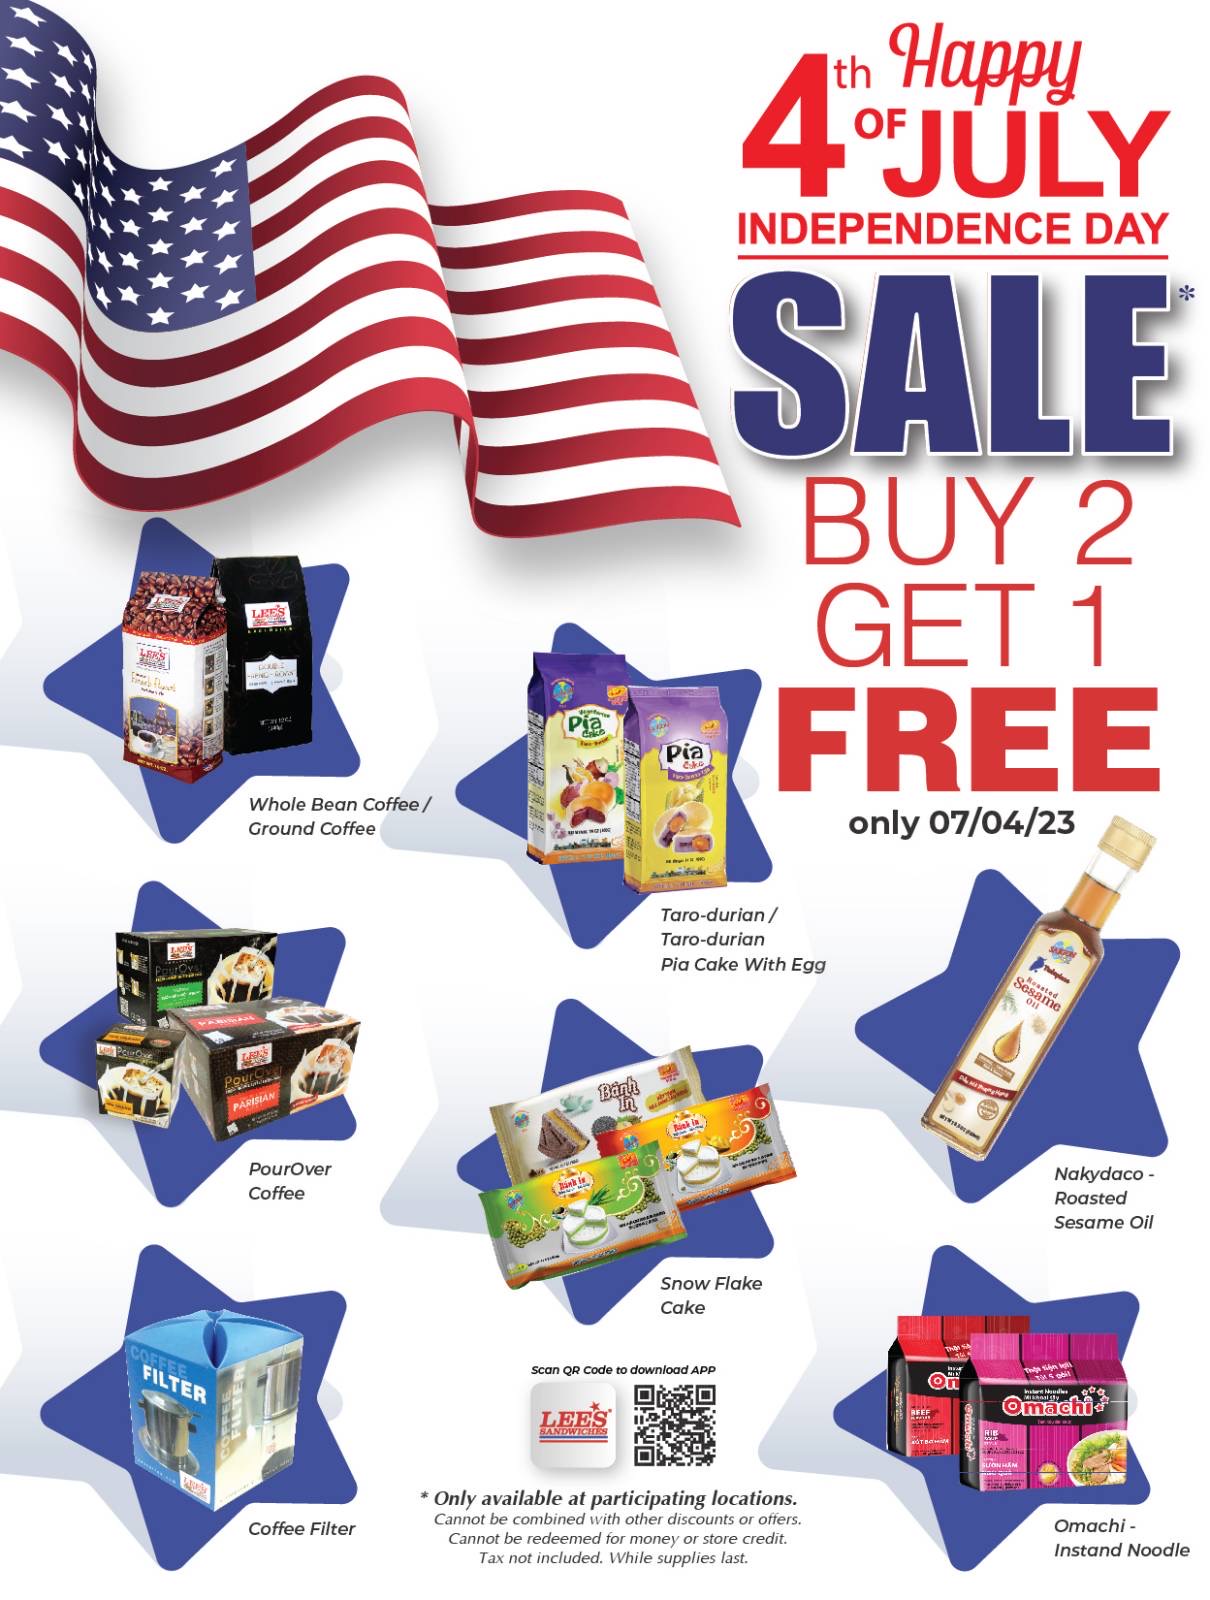 Happy July 4th! Let's celebrate with our both in-store & online special deals. Only 7/4/2023 at participating locations